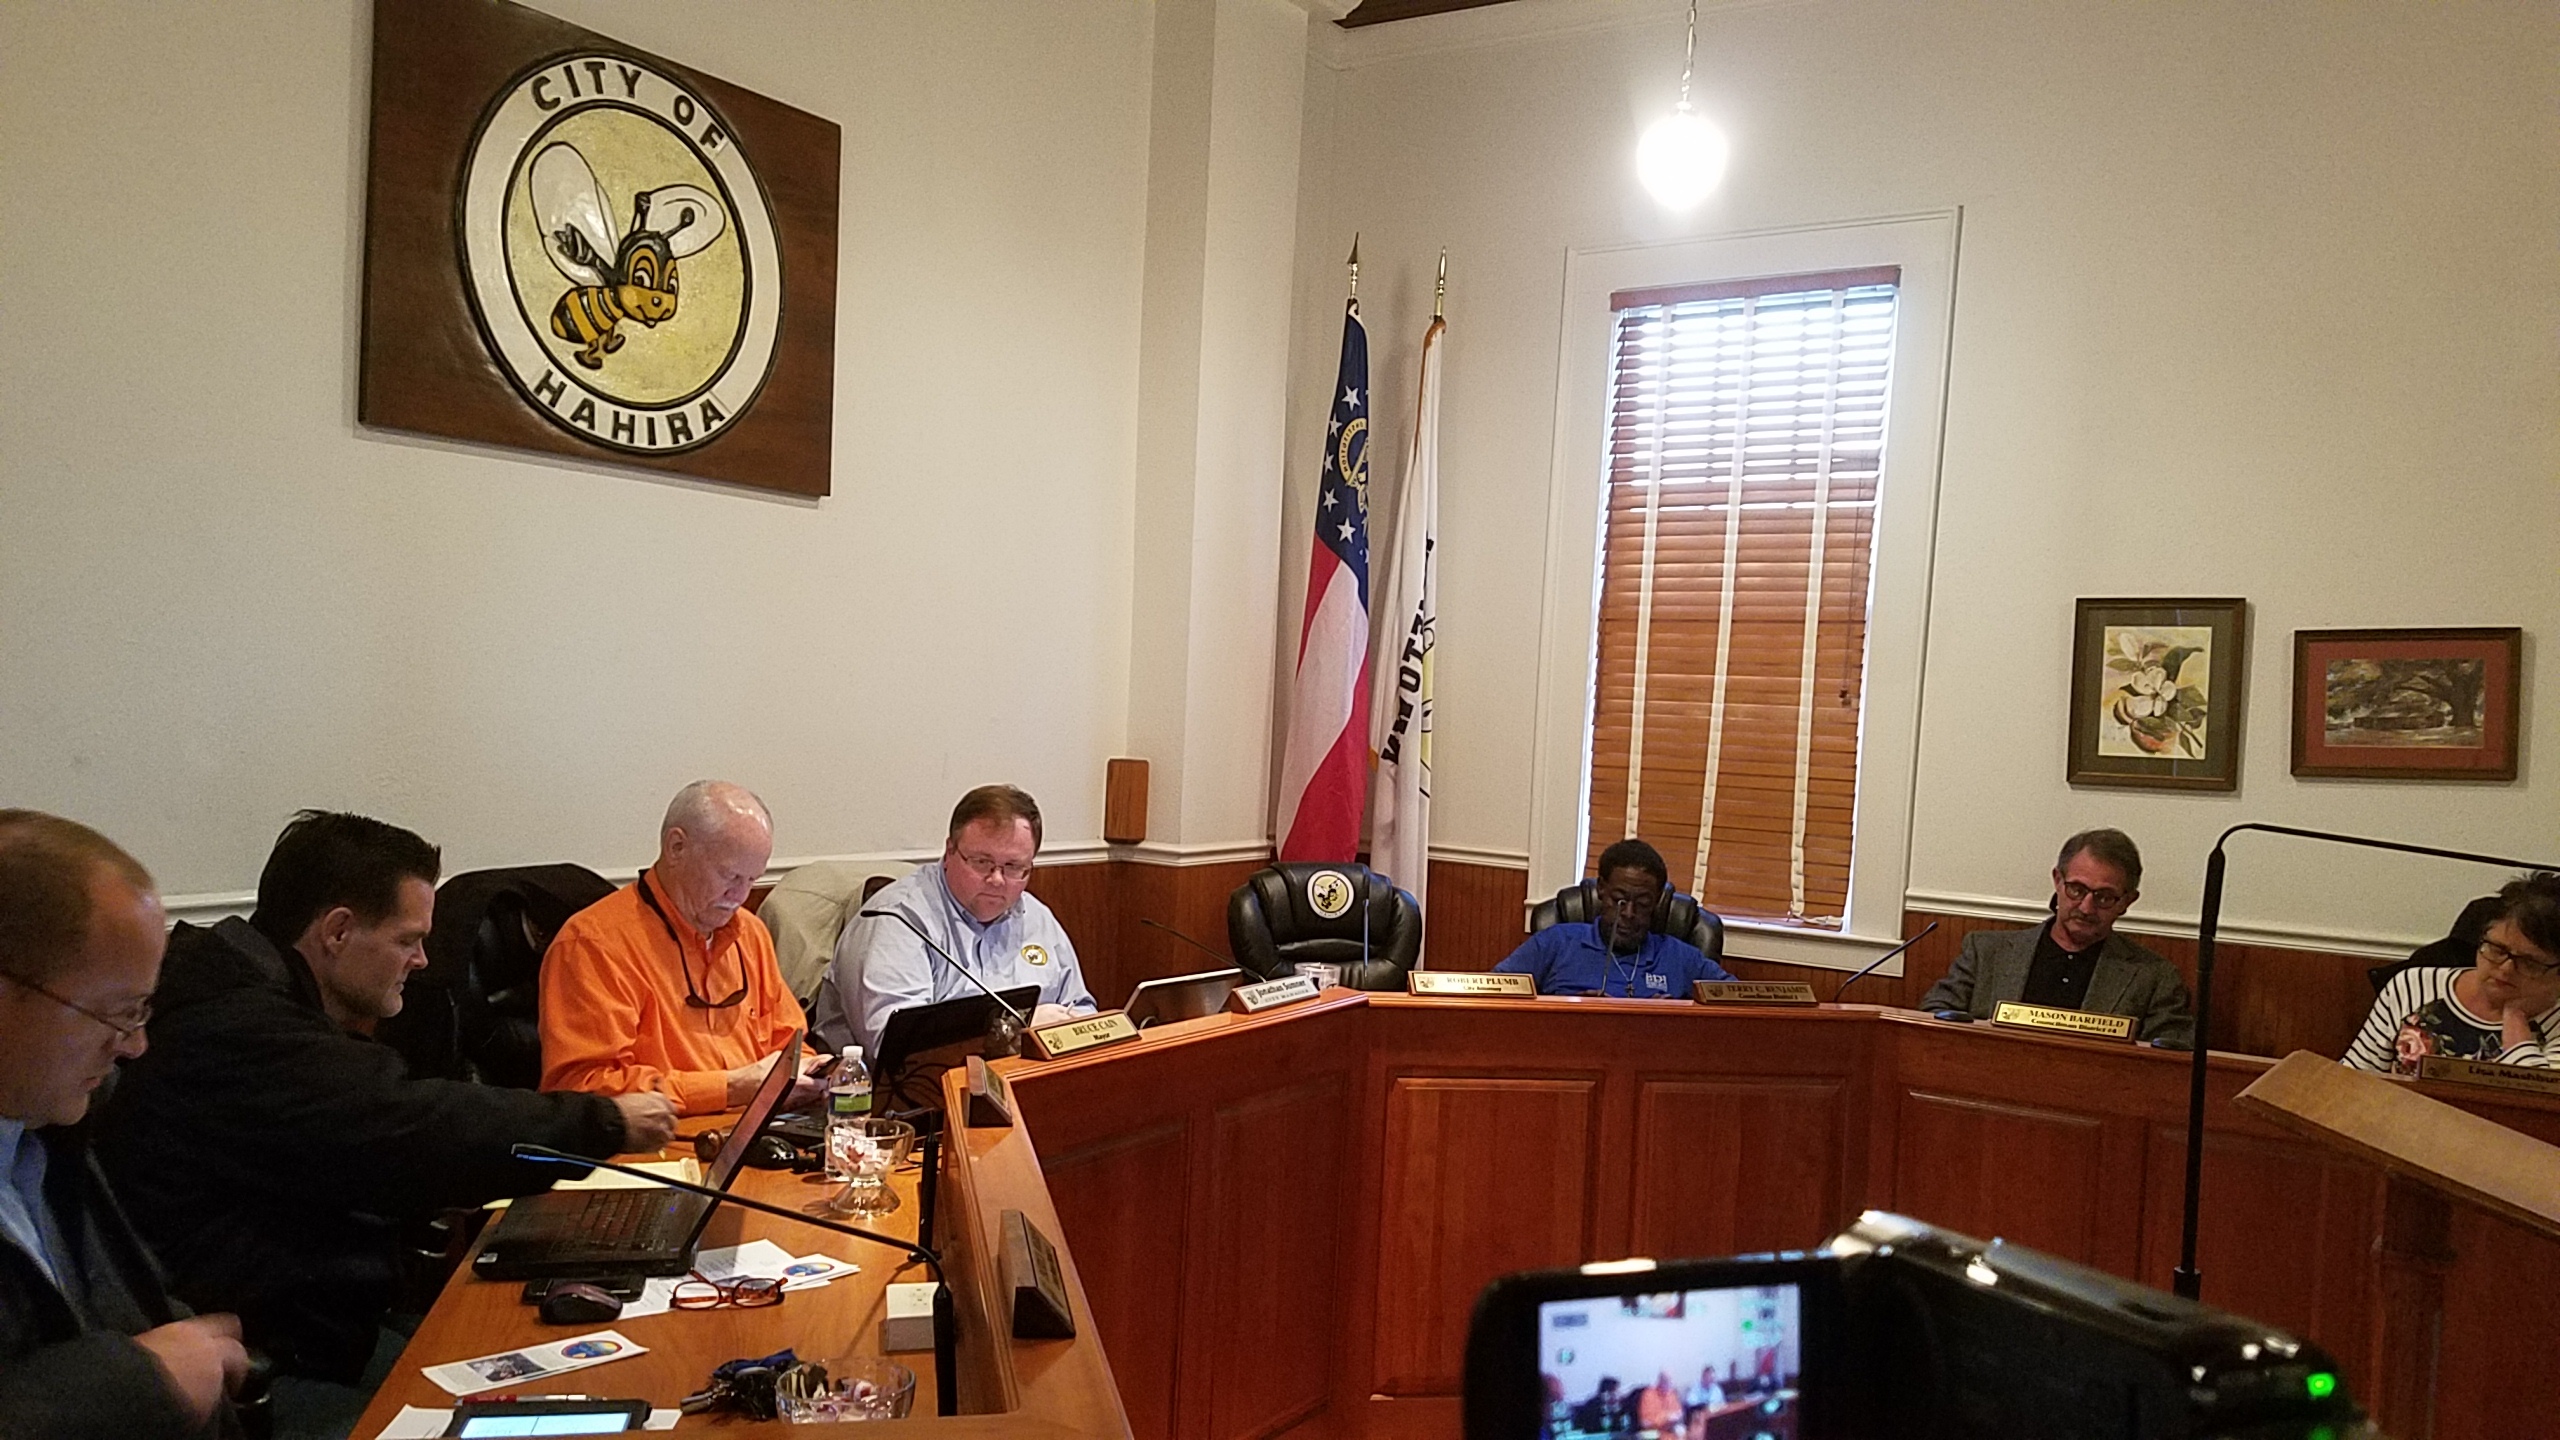 2560x1440 Clear view, City Council, in Hahira Work Session, by John S. Quarterman, 30 January 2018